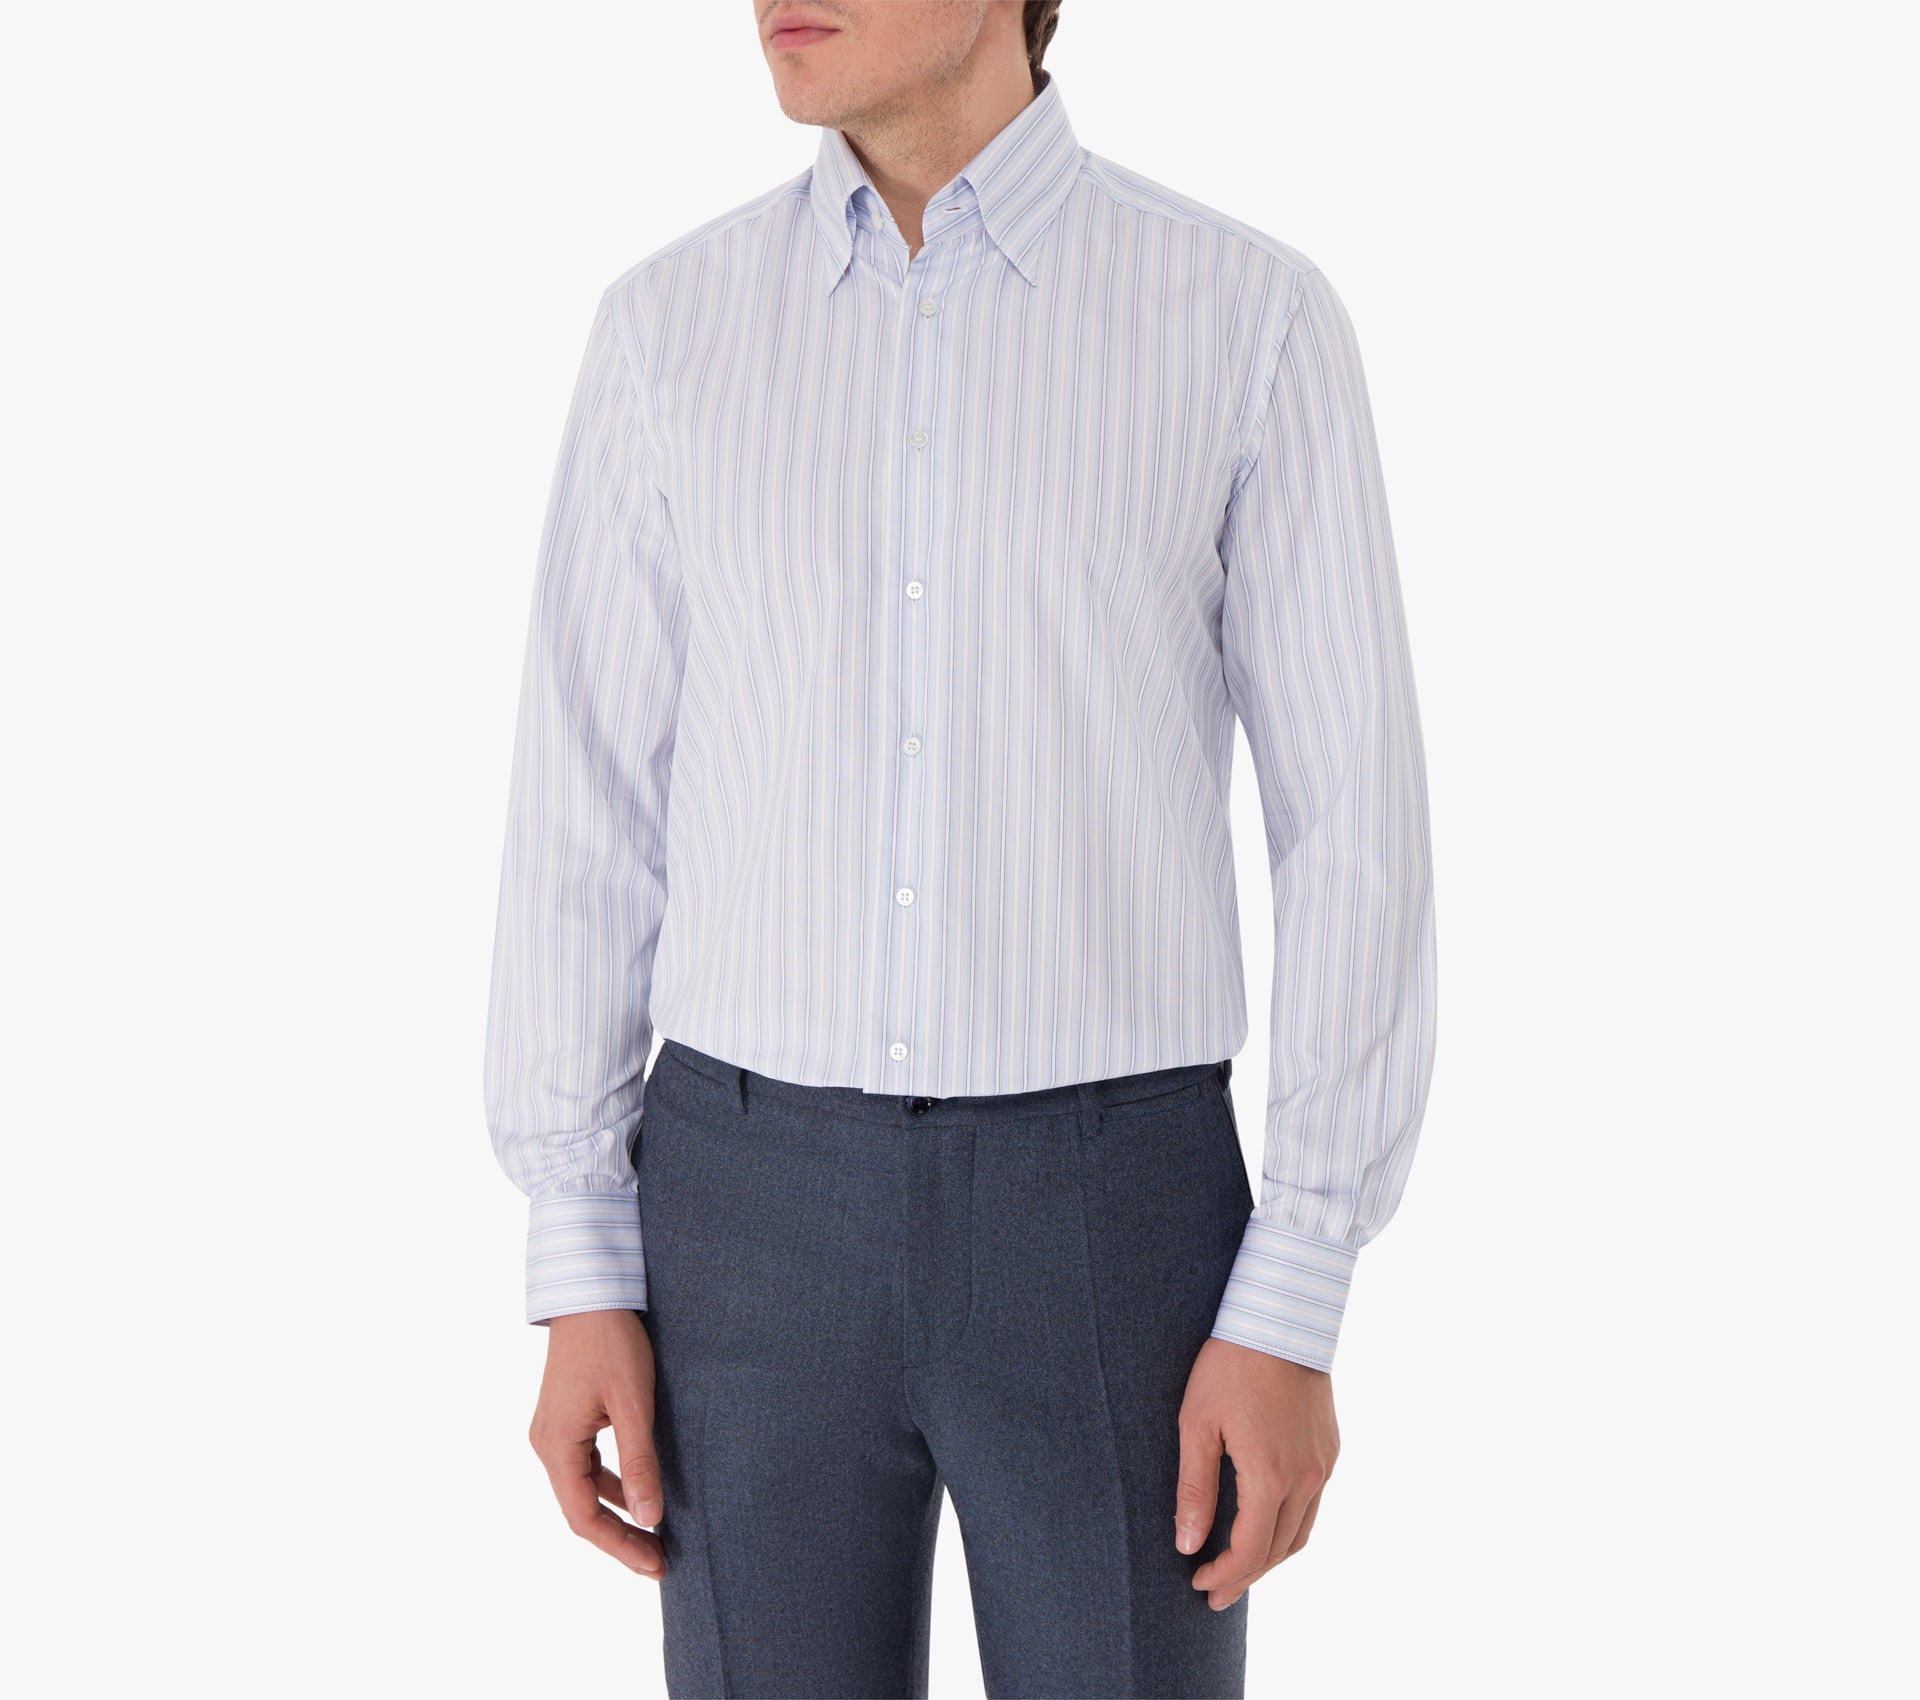 White and Sky-Blue Striped Business Shirt